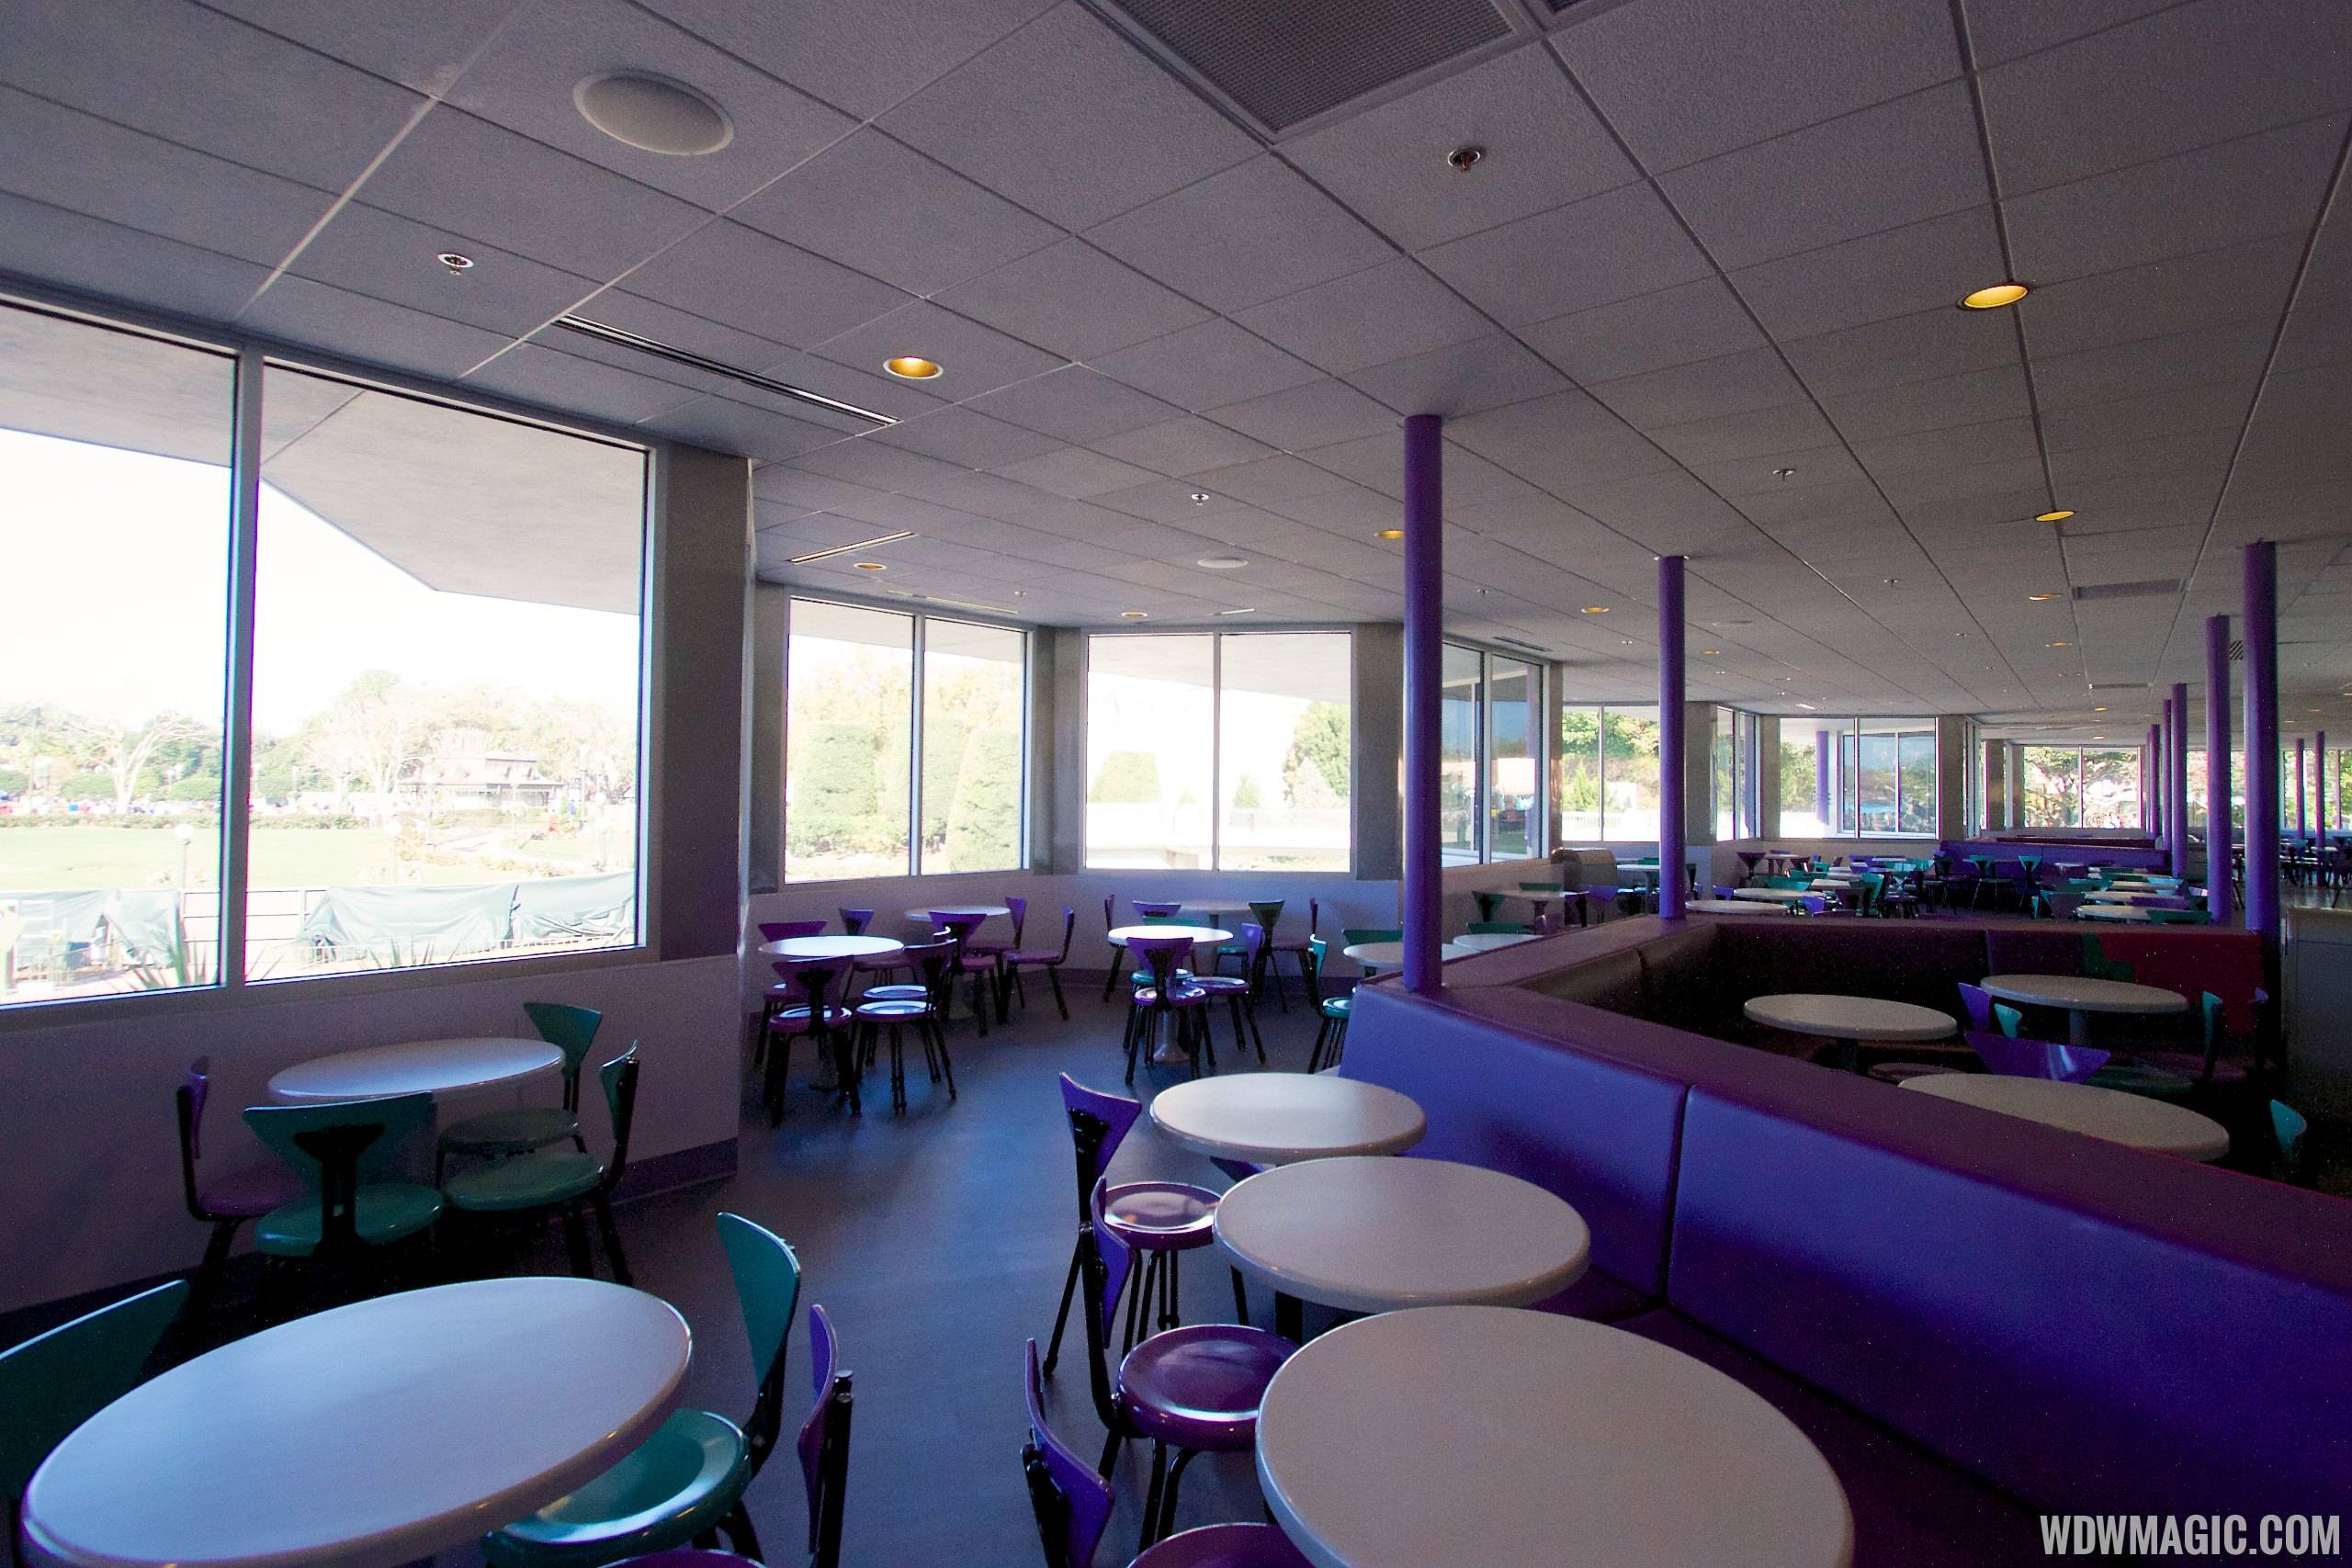 PHOTOS - Cosmic Ray's exterior patio now enclosed and air-conditioned